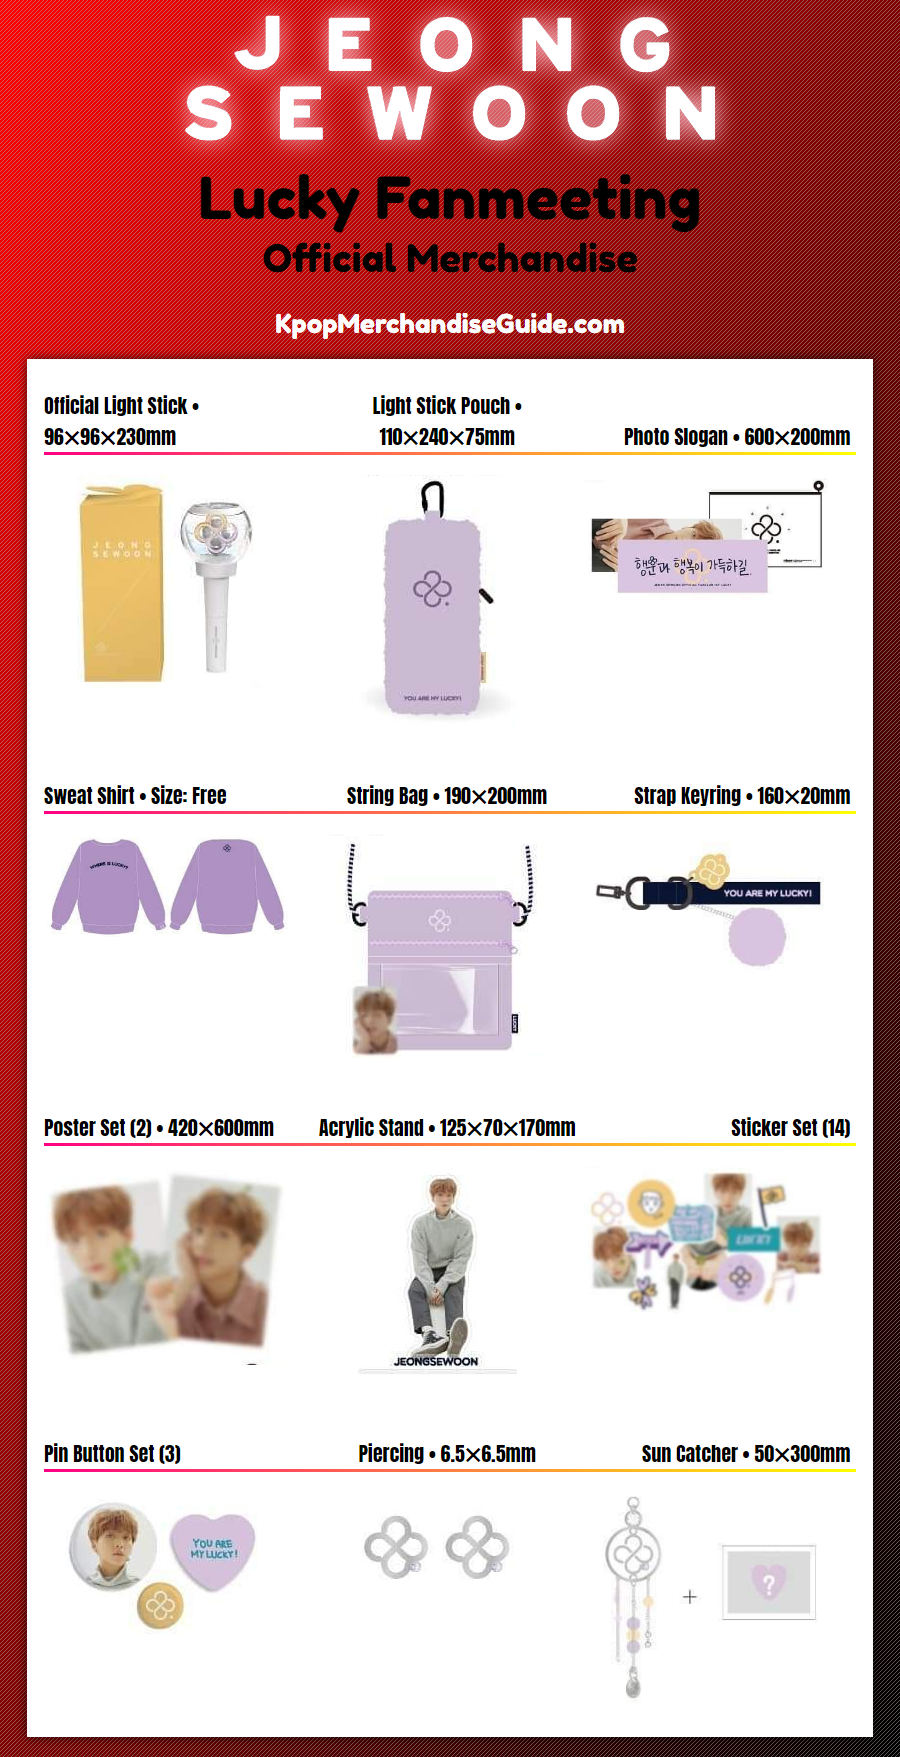 Jeong Se Woon Lucky Fanmeeting Merchandise